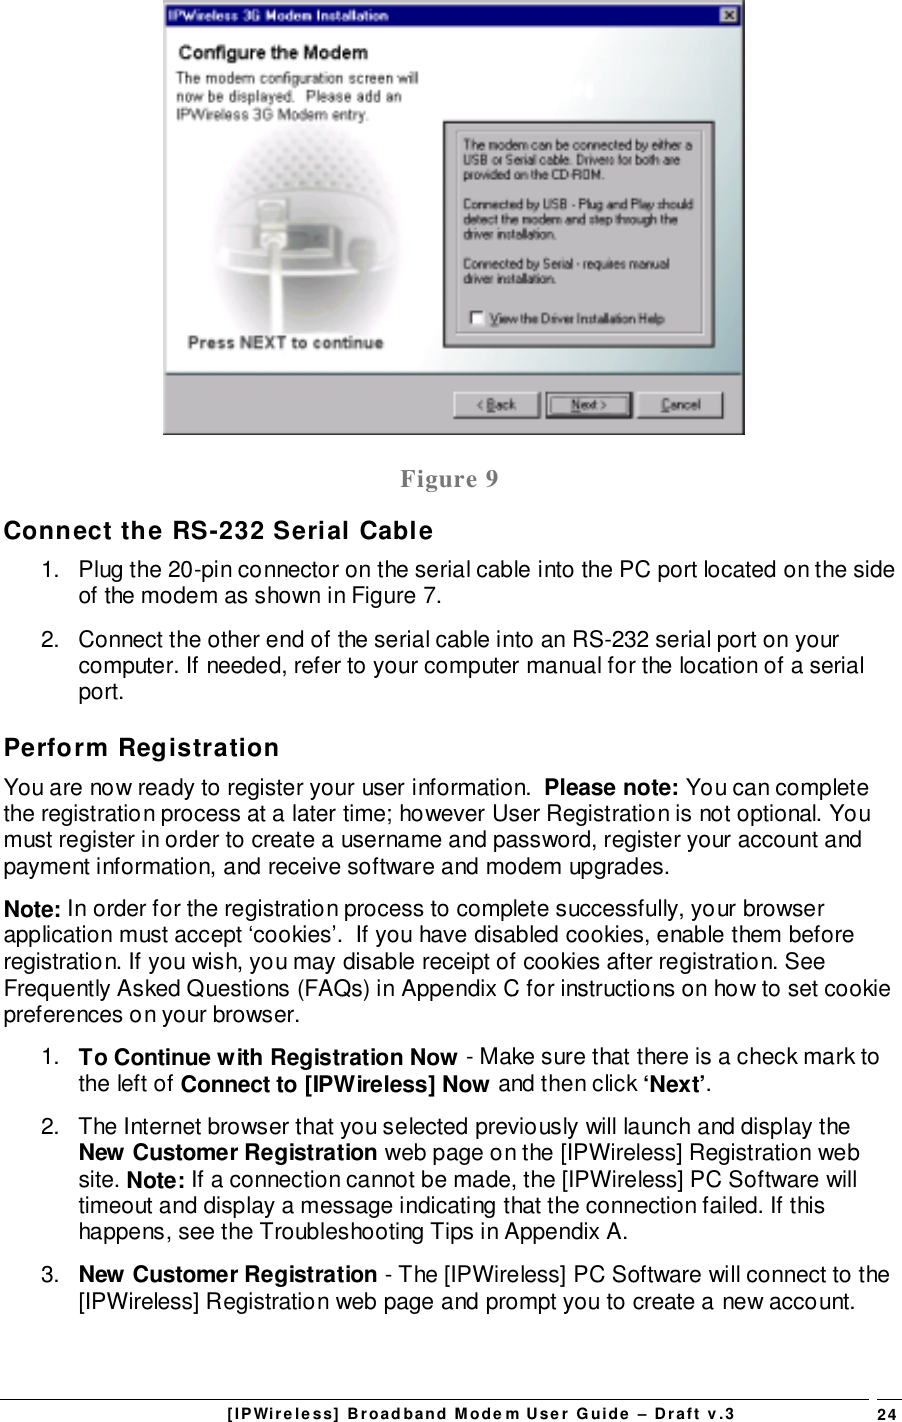 [IPWireless] Broadband Modem User Guide – Draft v.3 24Figure 9Connect the RS-232 Serial Cable1.  Plug the 20-pin connector on the serial cable into the PC port located on the sideof the modem as shown in Figure 7.2.  Connect the other end of the serial cable into an RS-232 serial port on yourcomputer. If needed, refer to your computer manual for the location of a serialport.Perform RegistrationYou are now ready to register your user information.  Please note: You can completethe registration process at a later time; however User Registration is not optional. Youmust register in order to create a username and password, register your account andpayment information, and receive software and modem upgrades.Note: In order for the registration process to complete successfully, your browserapplication must accept ‘cookies’.  If you have disabled cookies, enable them beforeregistration. If you wish, you may disable receipt of cookies after registration. SeeFrequently Asked Questions (FAQs) in Appendix C for instructions on how to set cookiepreferences on your browser.1.  To Continue with Registration Now - Make sure that there is a check mark tothe left of Connect to [IPWireless] Now and then click ‘Next’.2.  The Internet browser that you selected previously will launch and display theNew Customer Registration web page on the [IPWireless] Registration website. Note: If a connection cannot be made, the [IPWireless] PC Software willtimeout and display a message indicating that the connection failed. If thishappens, see the Troubleshooting Tips in Appendix A.3.  New Customer Registration - The [IPWireless] PC Software will connect to the[IPWireless] Registration web page and prompt you to create a new account.